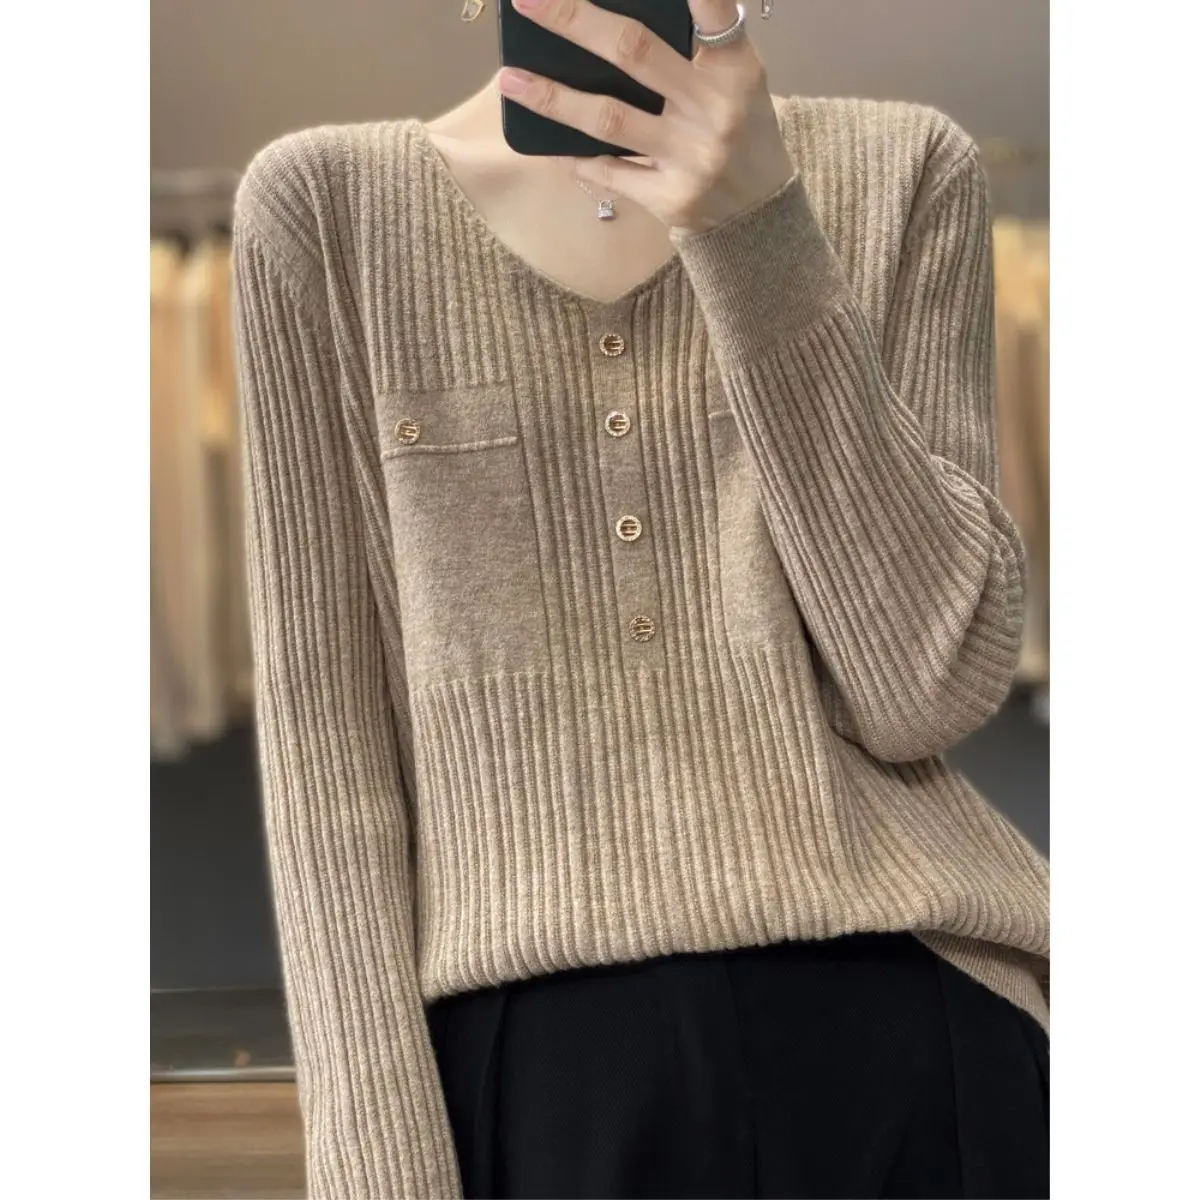 vR7FWomen Sweater and Pullovers Fall Winter New Skinny Jumpers V neck Basic Warm Sweater Pullovers Warm